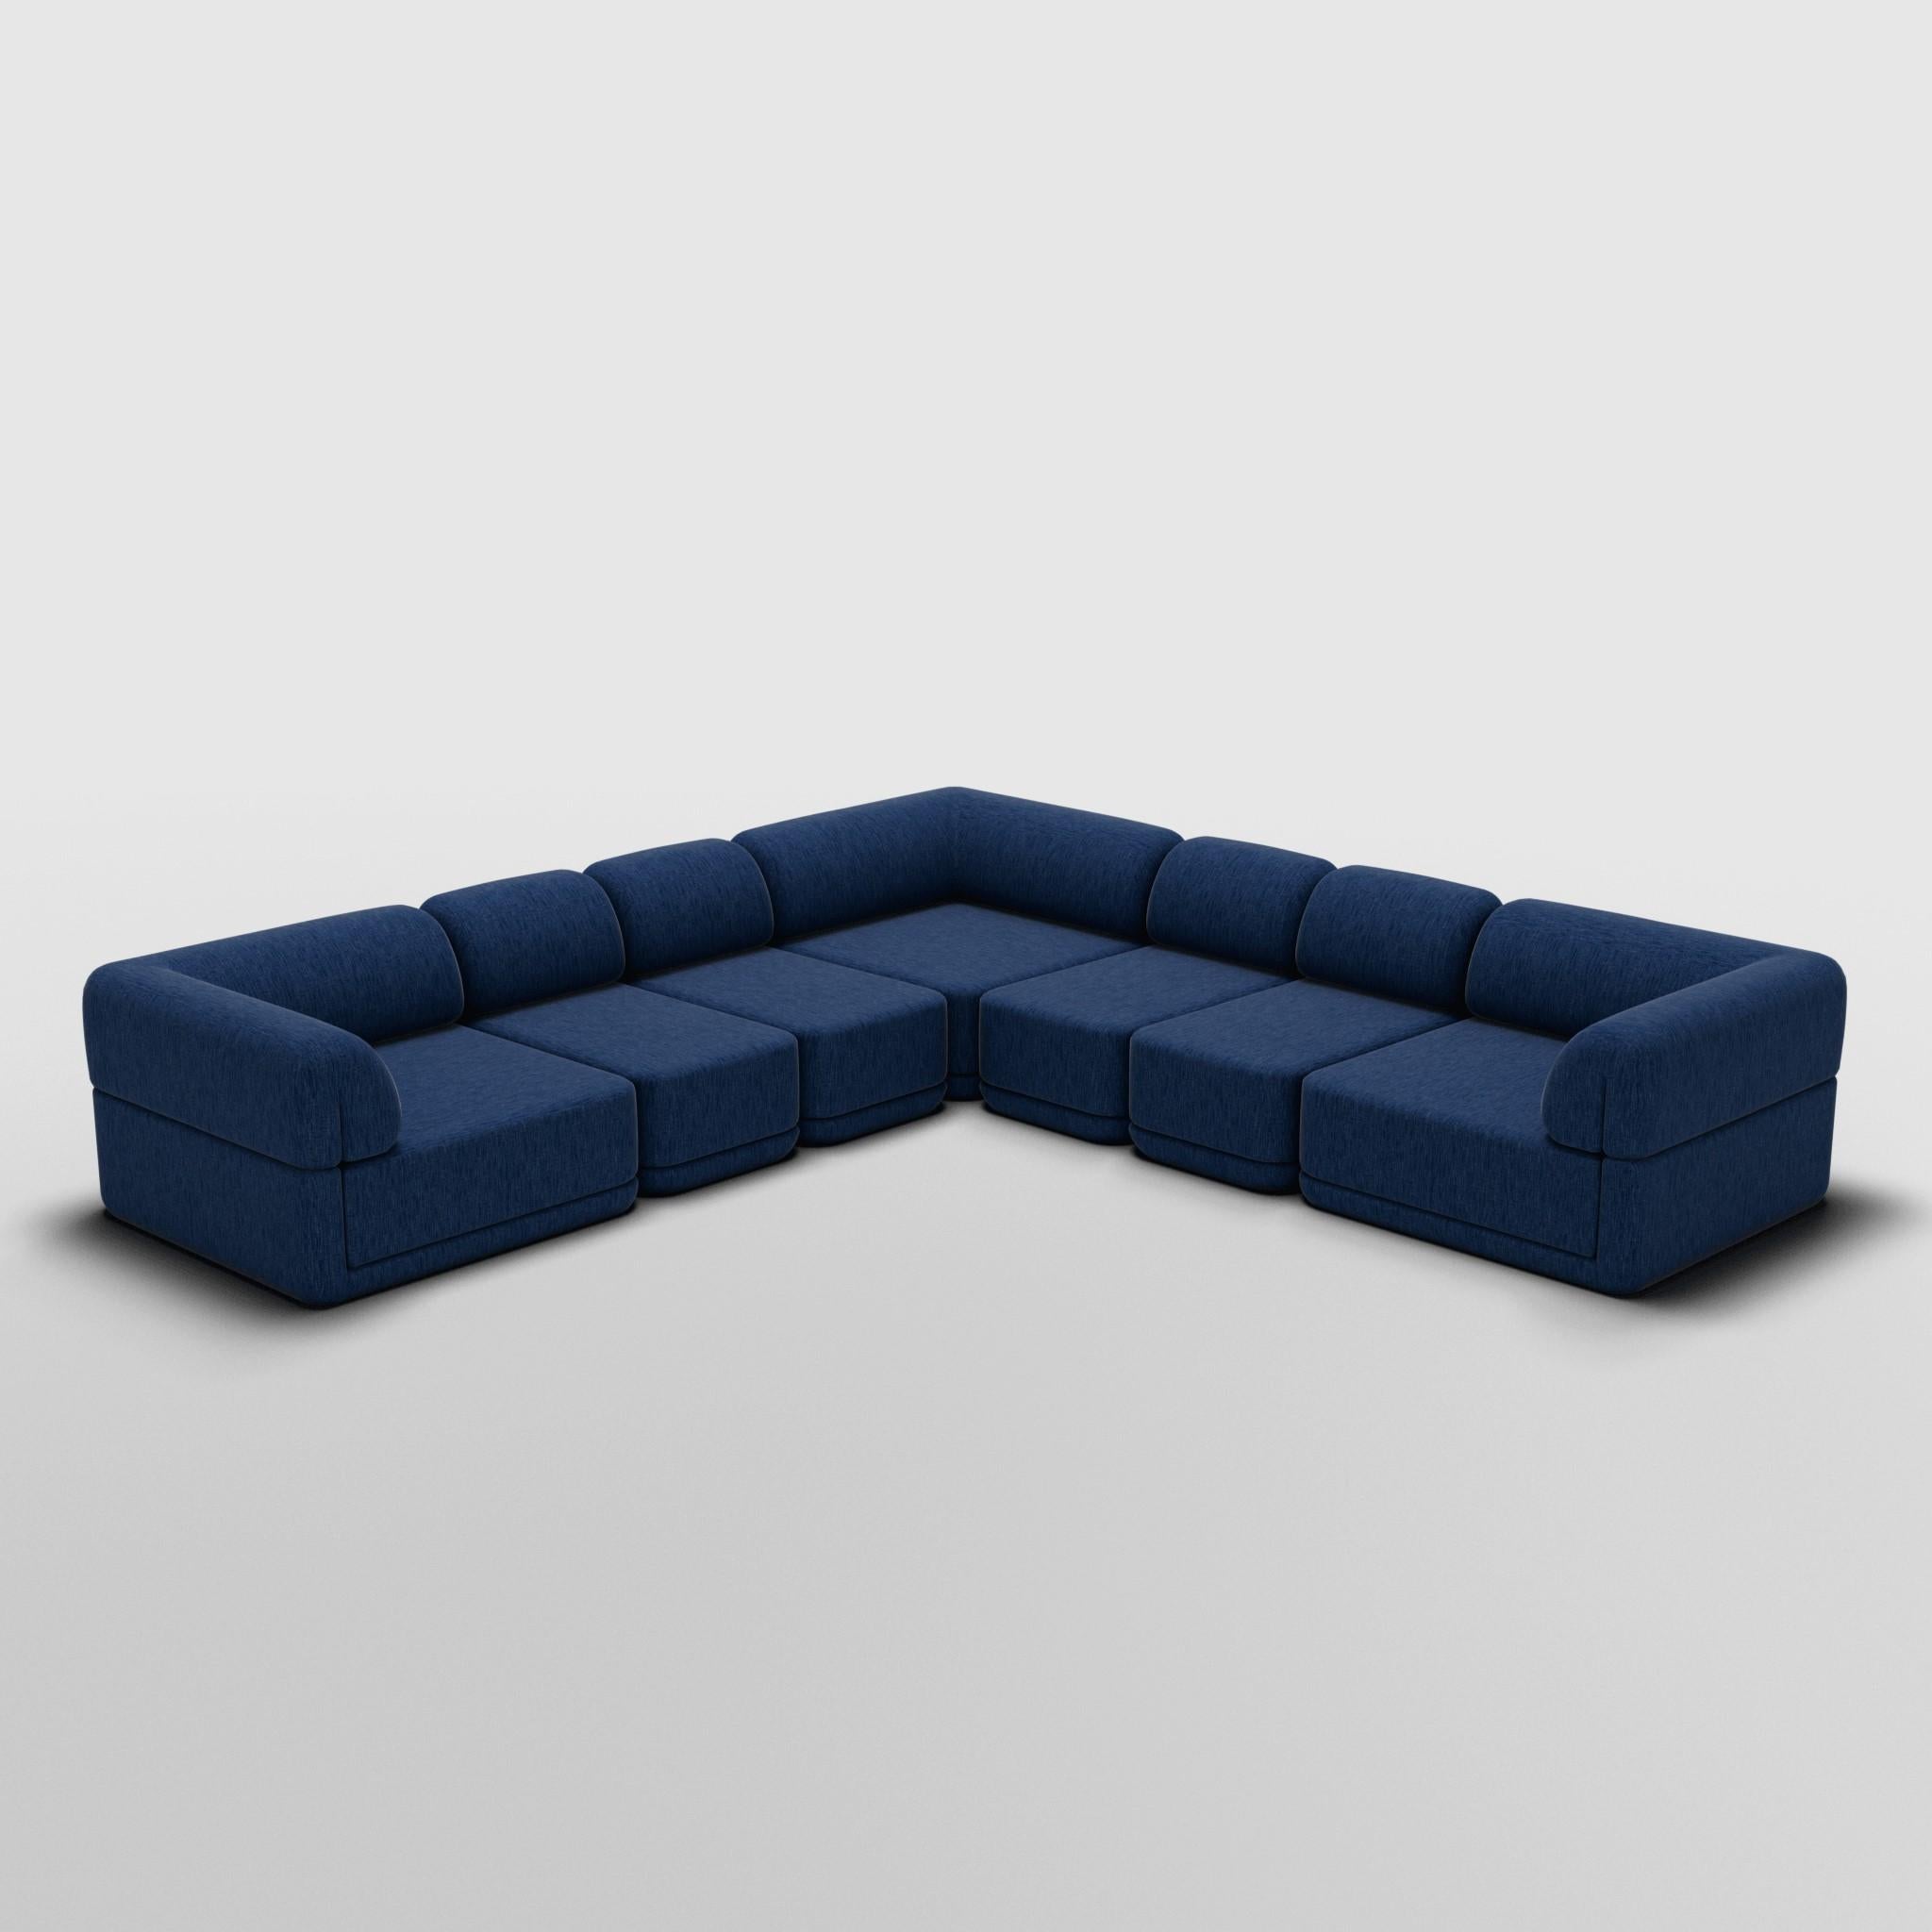 Contemporary The Cube Sofa - Corner Slim Sectional For Sale